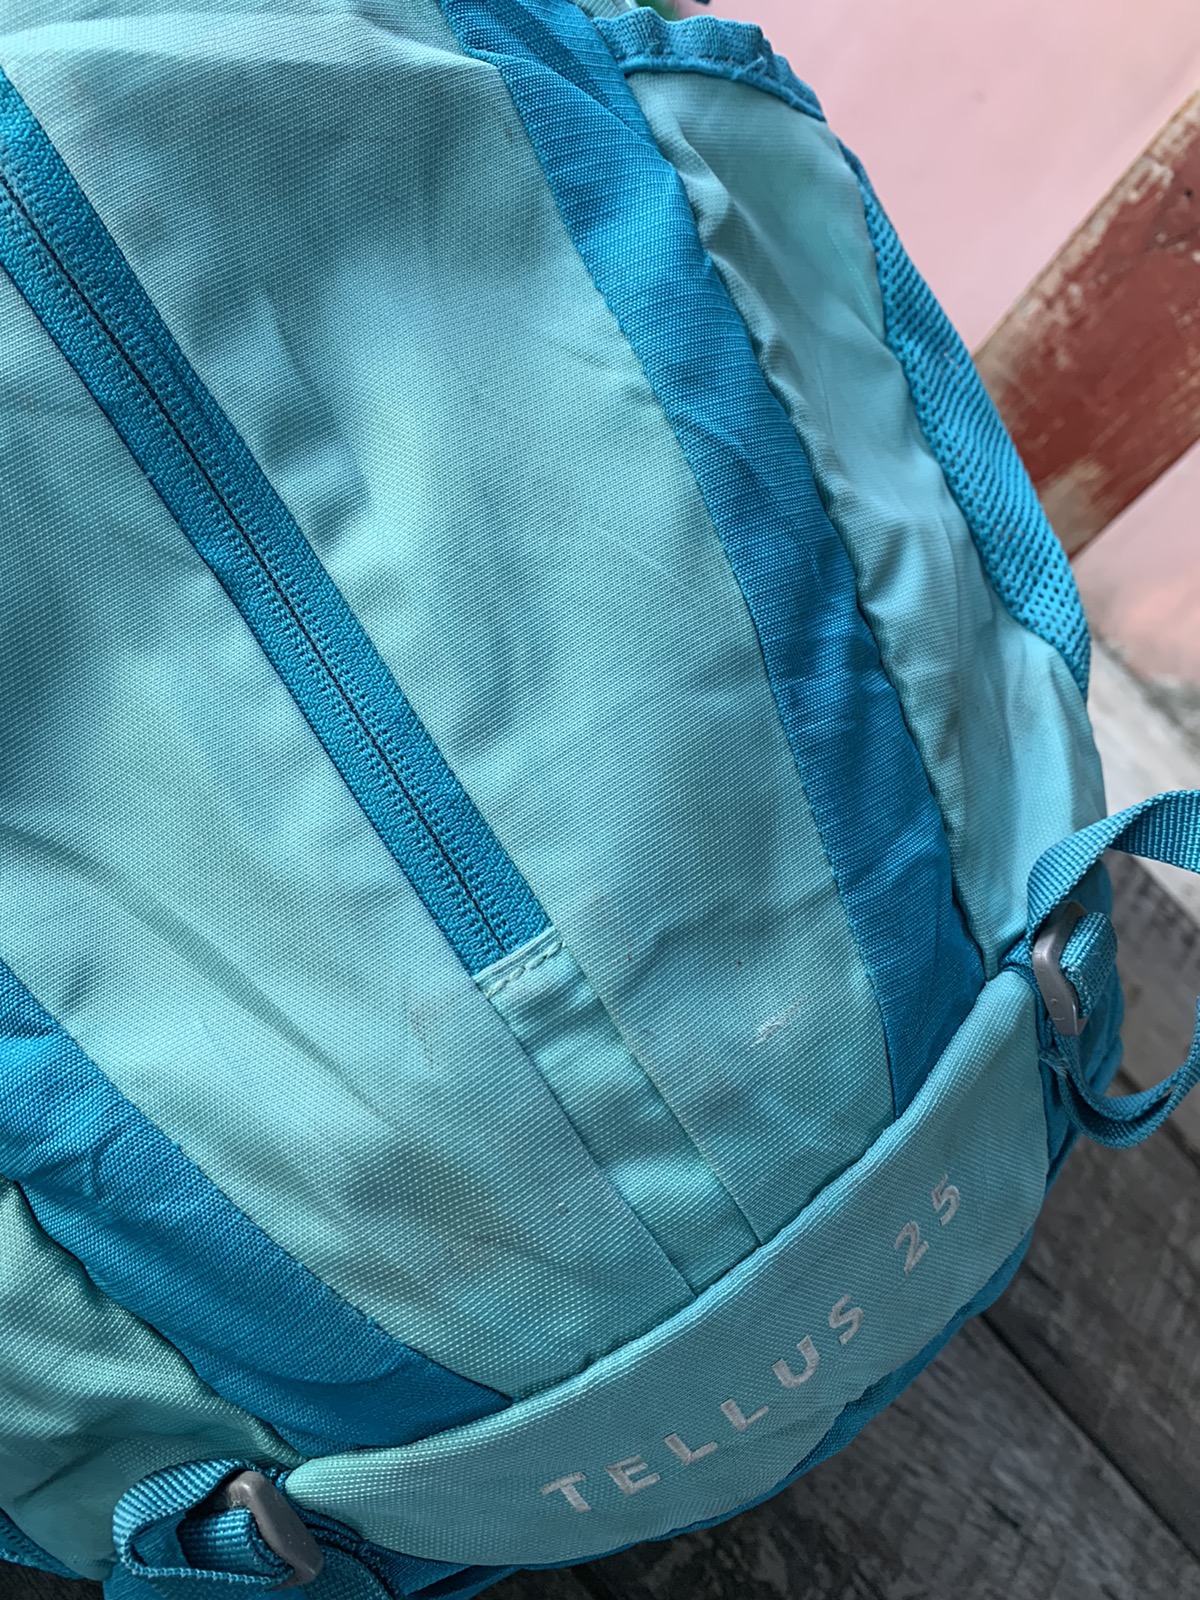 The north face back pack 25L - 7